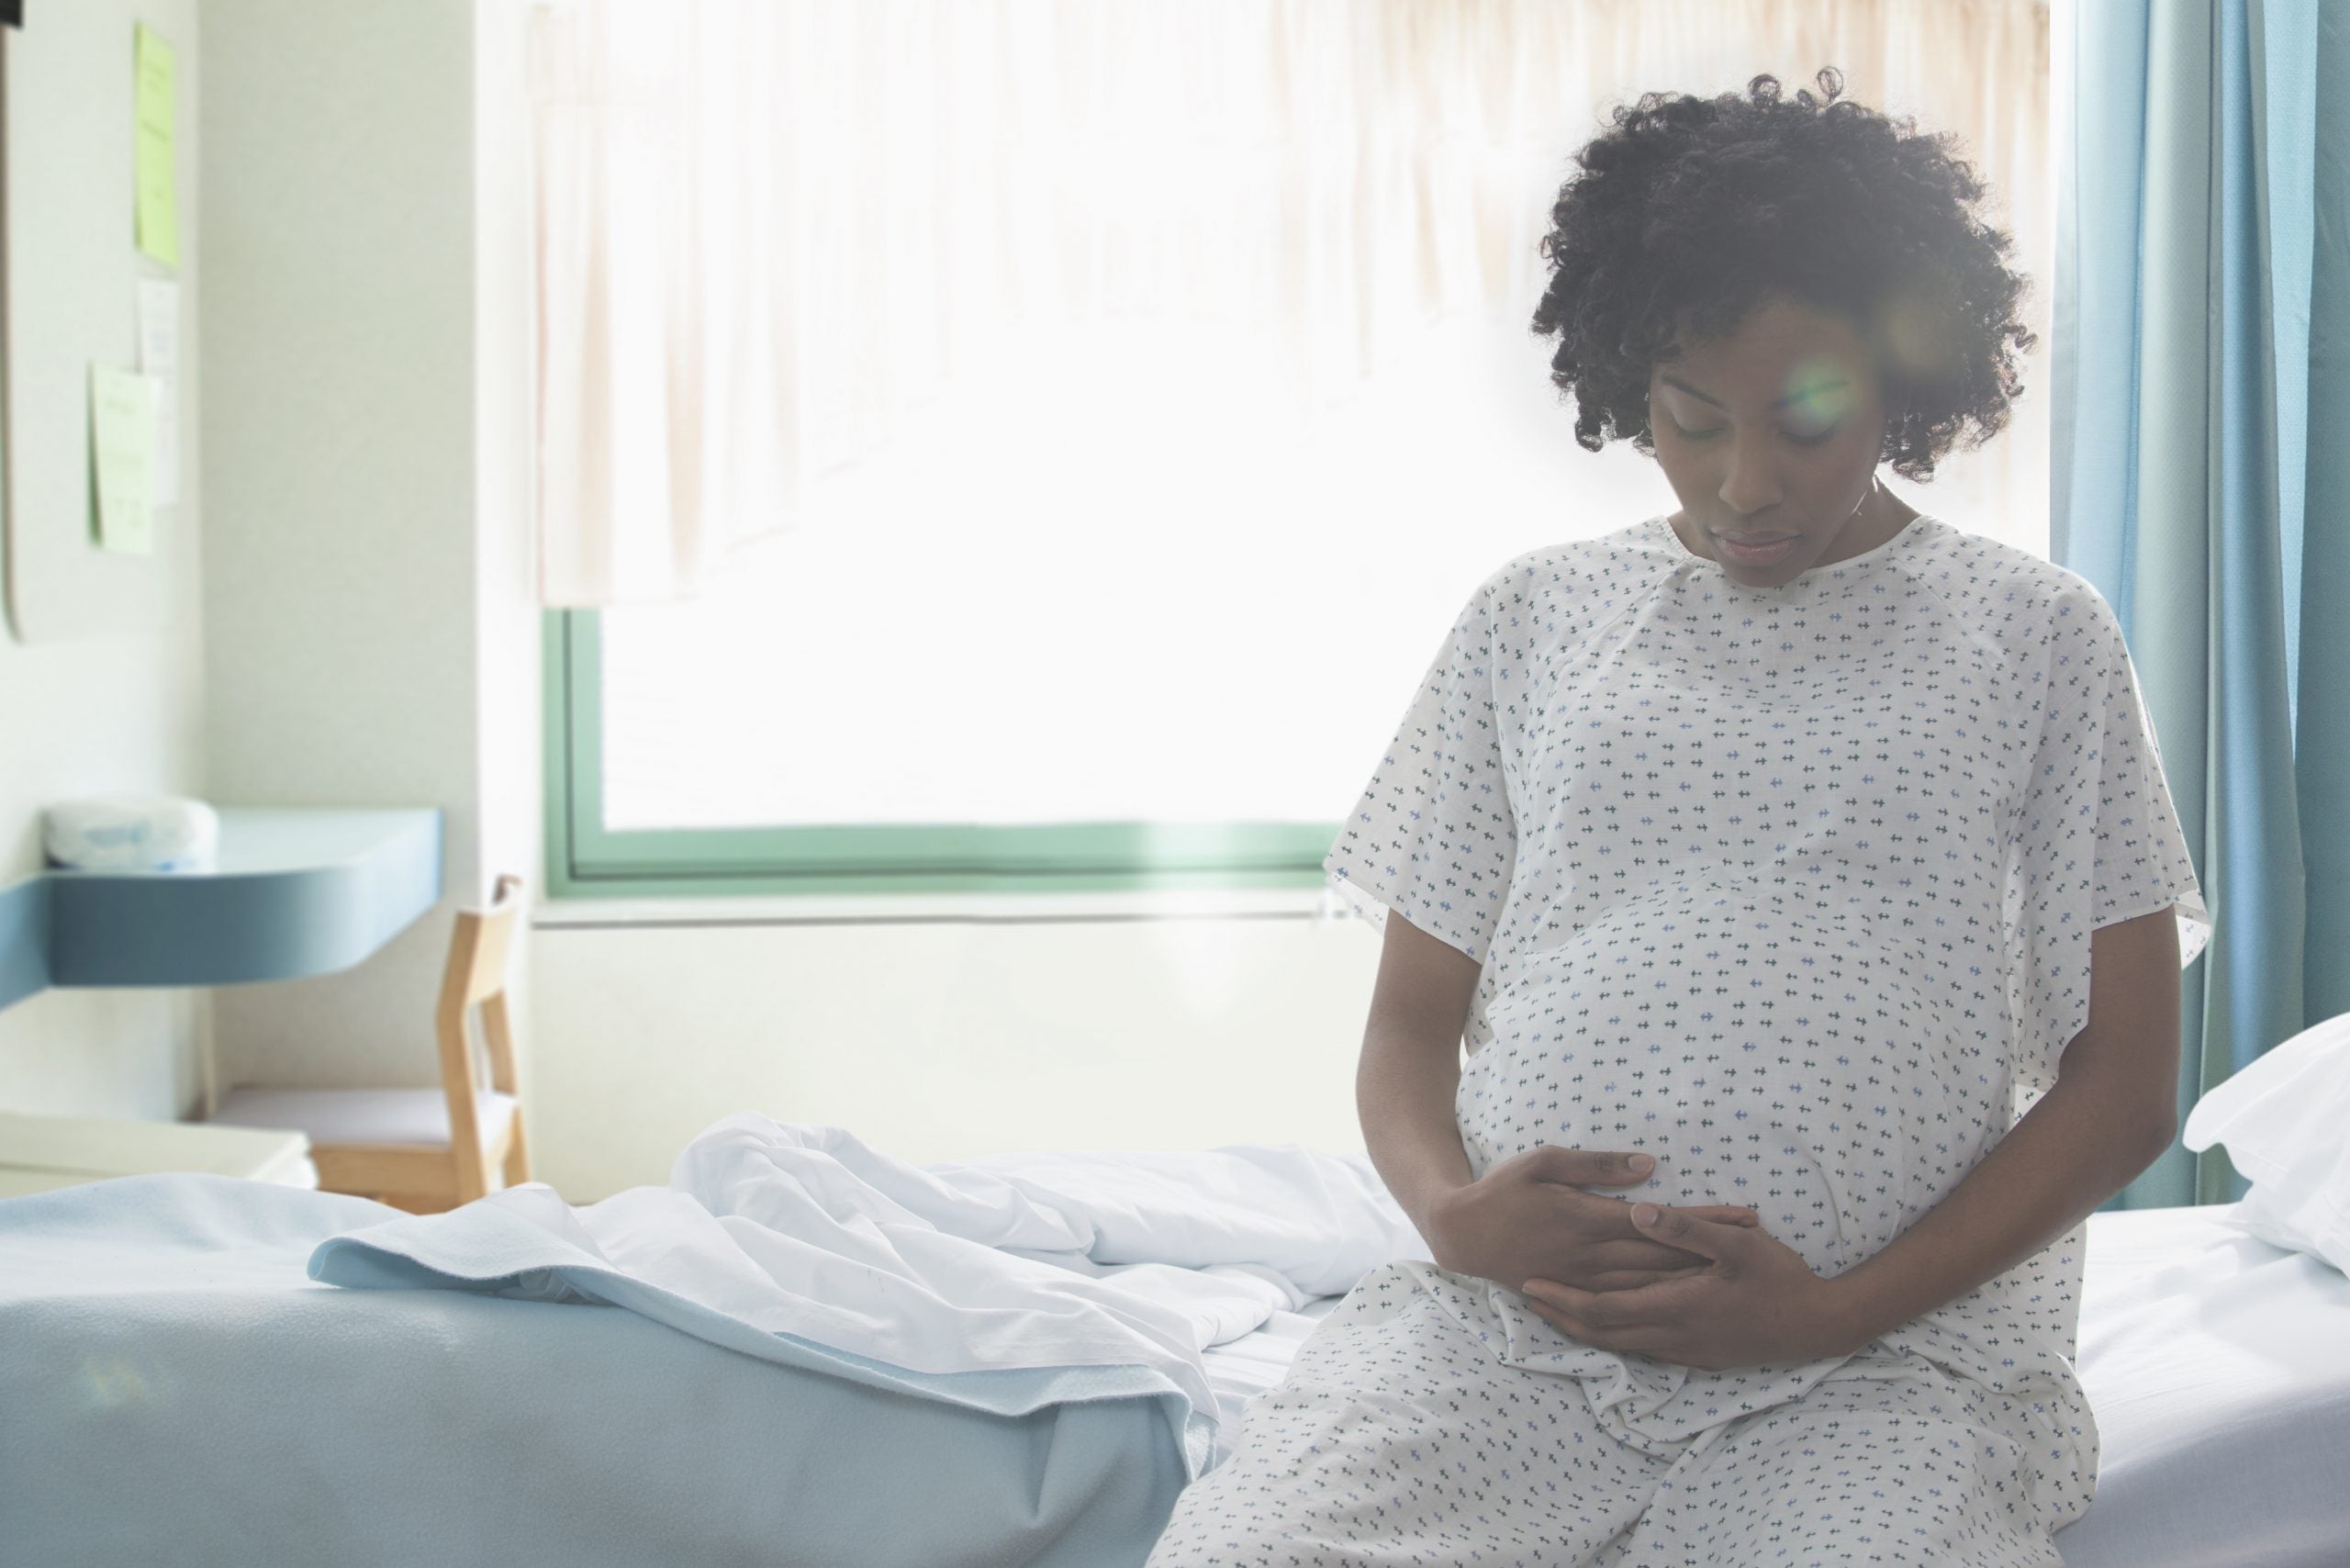 Confronting The Nation’s Racial Health Disparities in Maternal Health